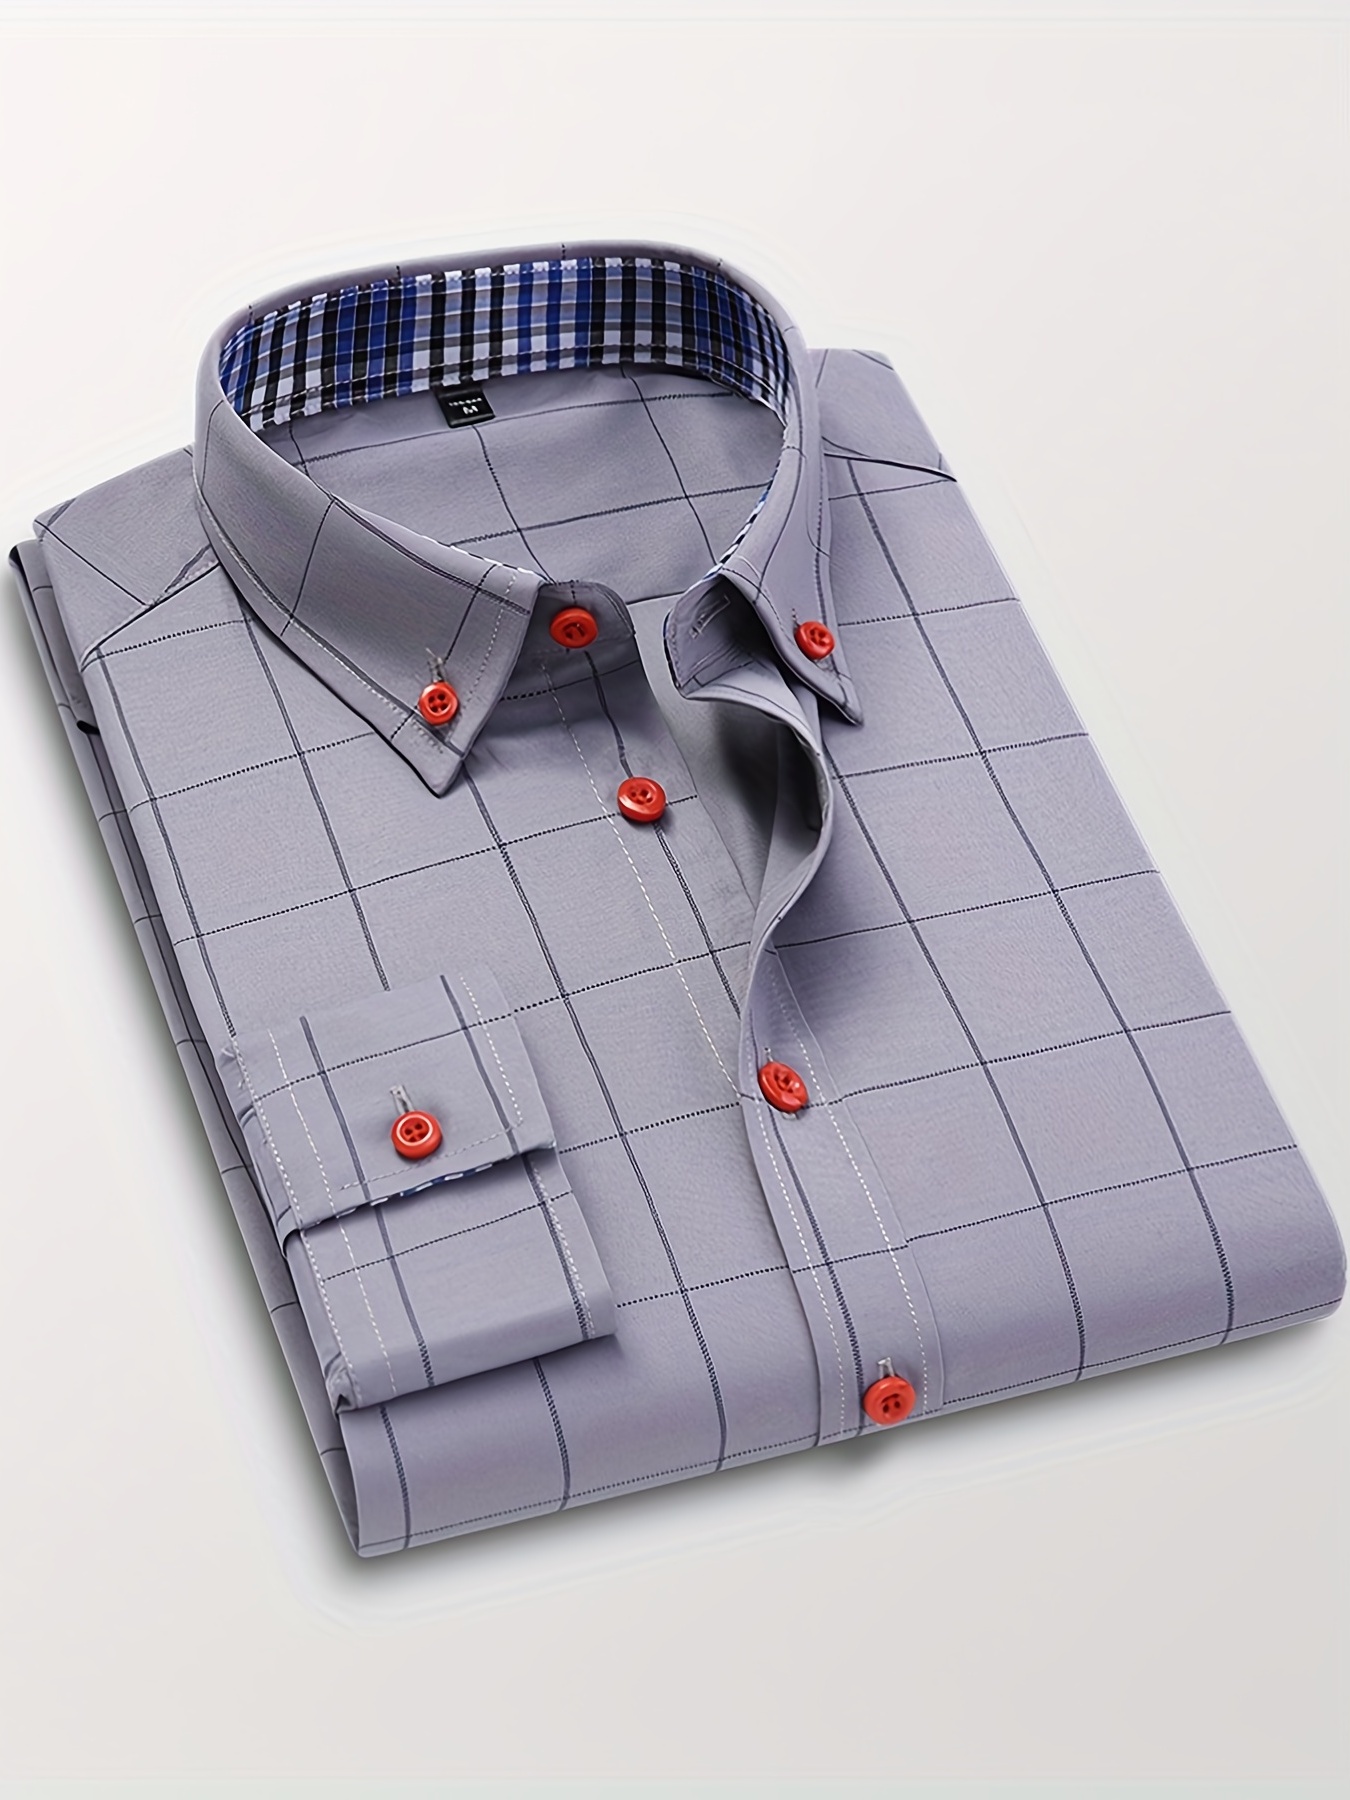 Cotton Printed Men's Branded Shirts, Full Or Long Sleeves, Casual Wear